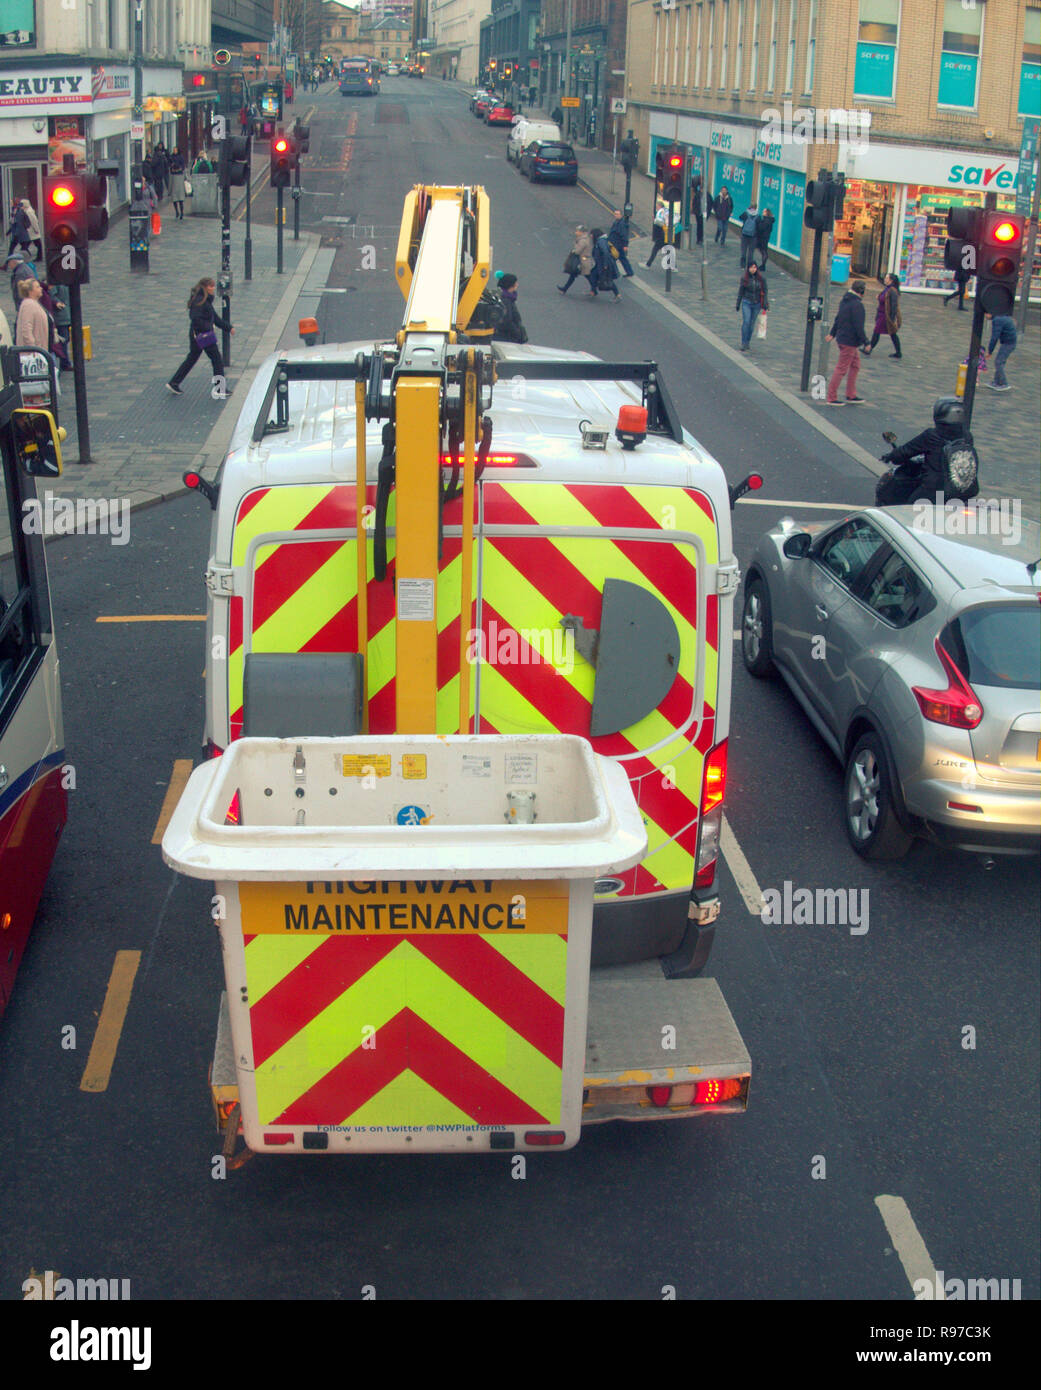 highway maintenance van on road with platform stuck in traffic at red light Stock Photo